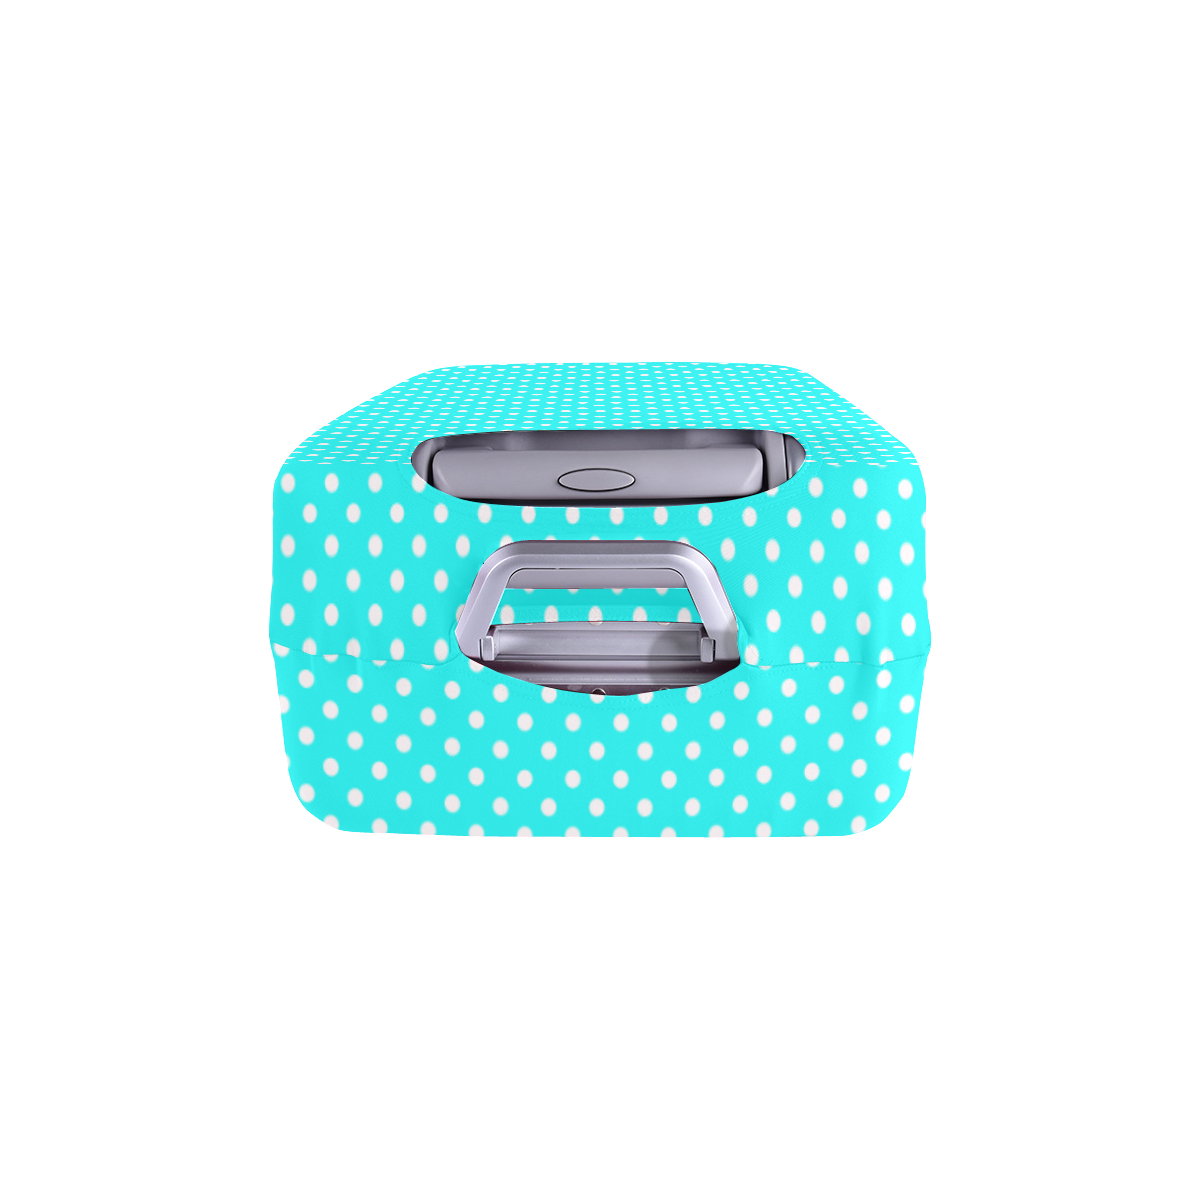 Baby blue polka dots Luggage Cover/Large 26"-28"